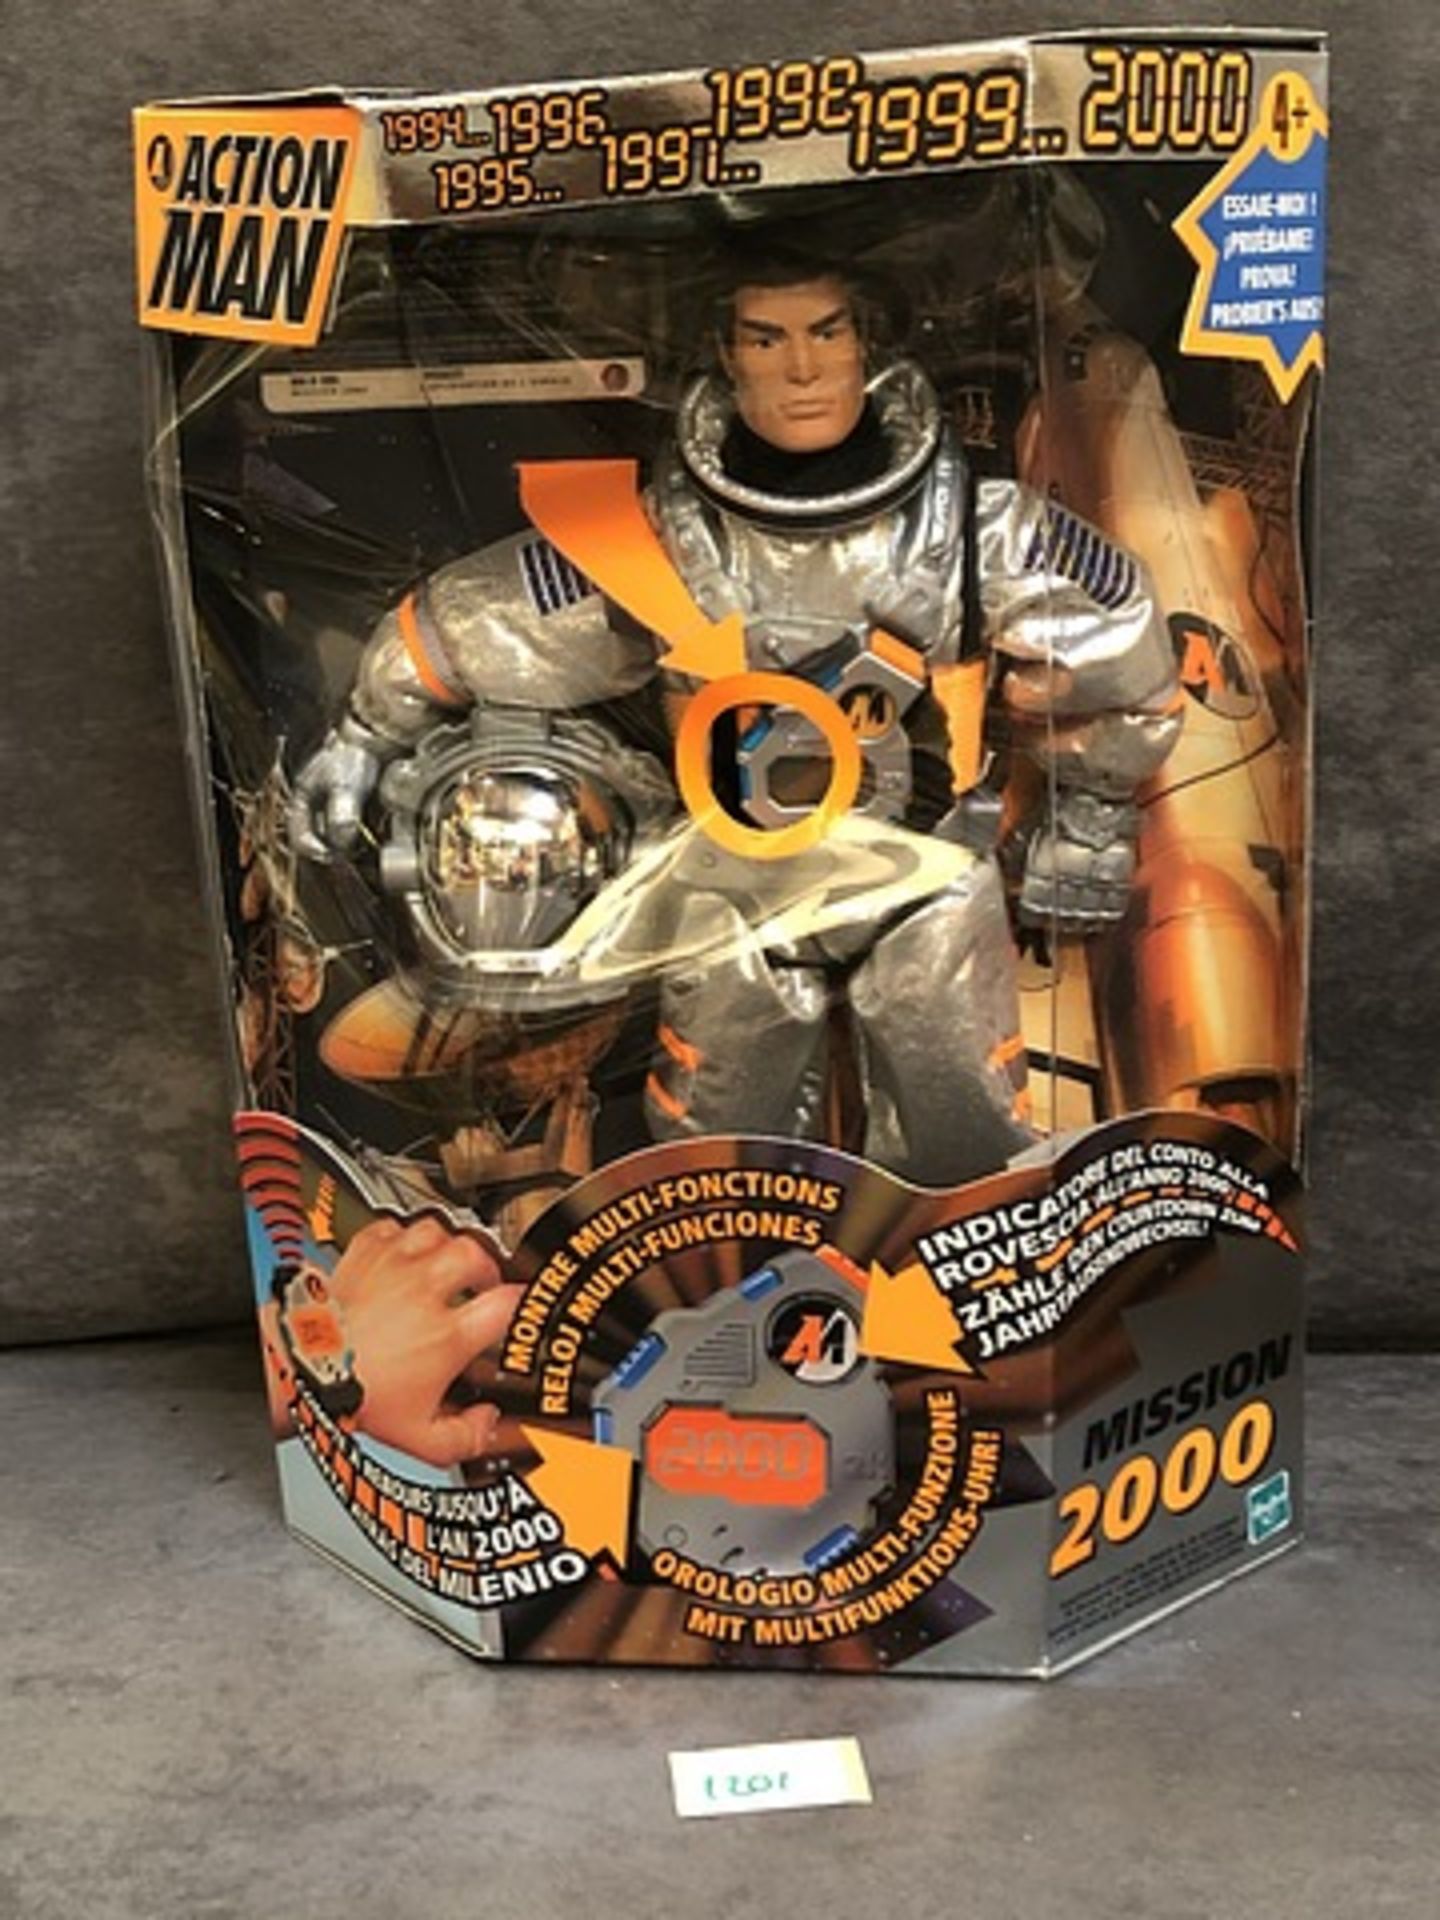 Action Man By Hasbro Mission 2000 Space Exploration Action Figure Complete With Mission Countdown